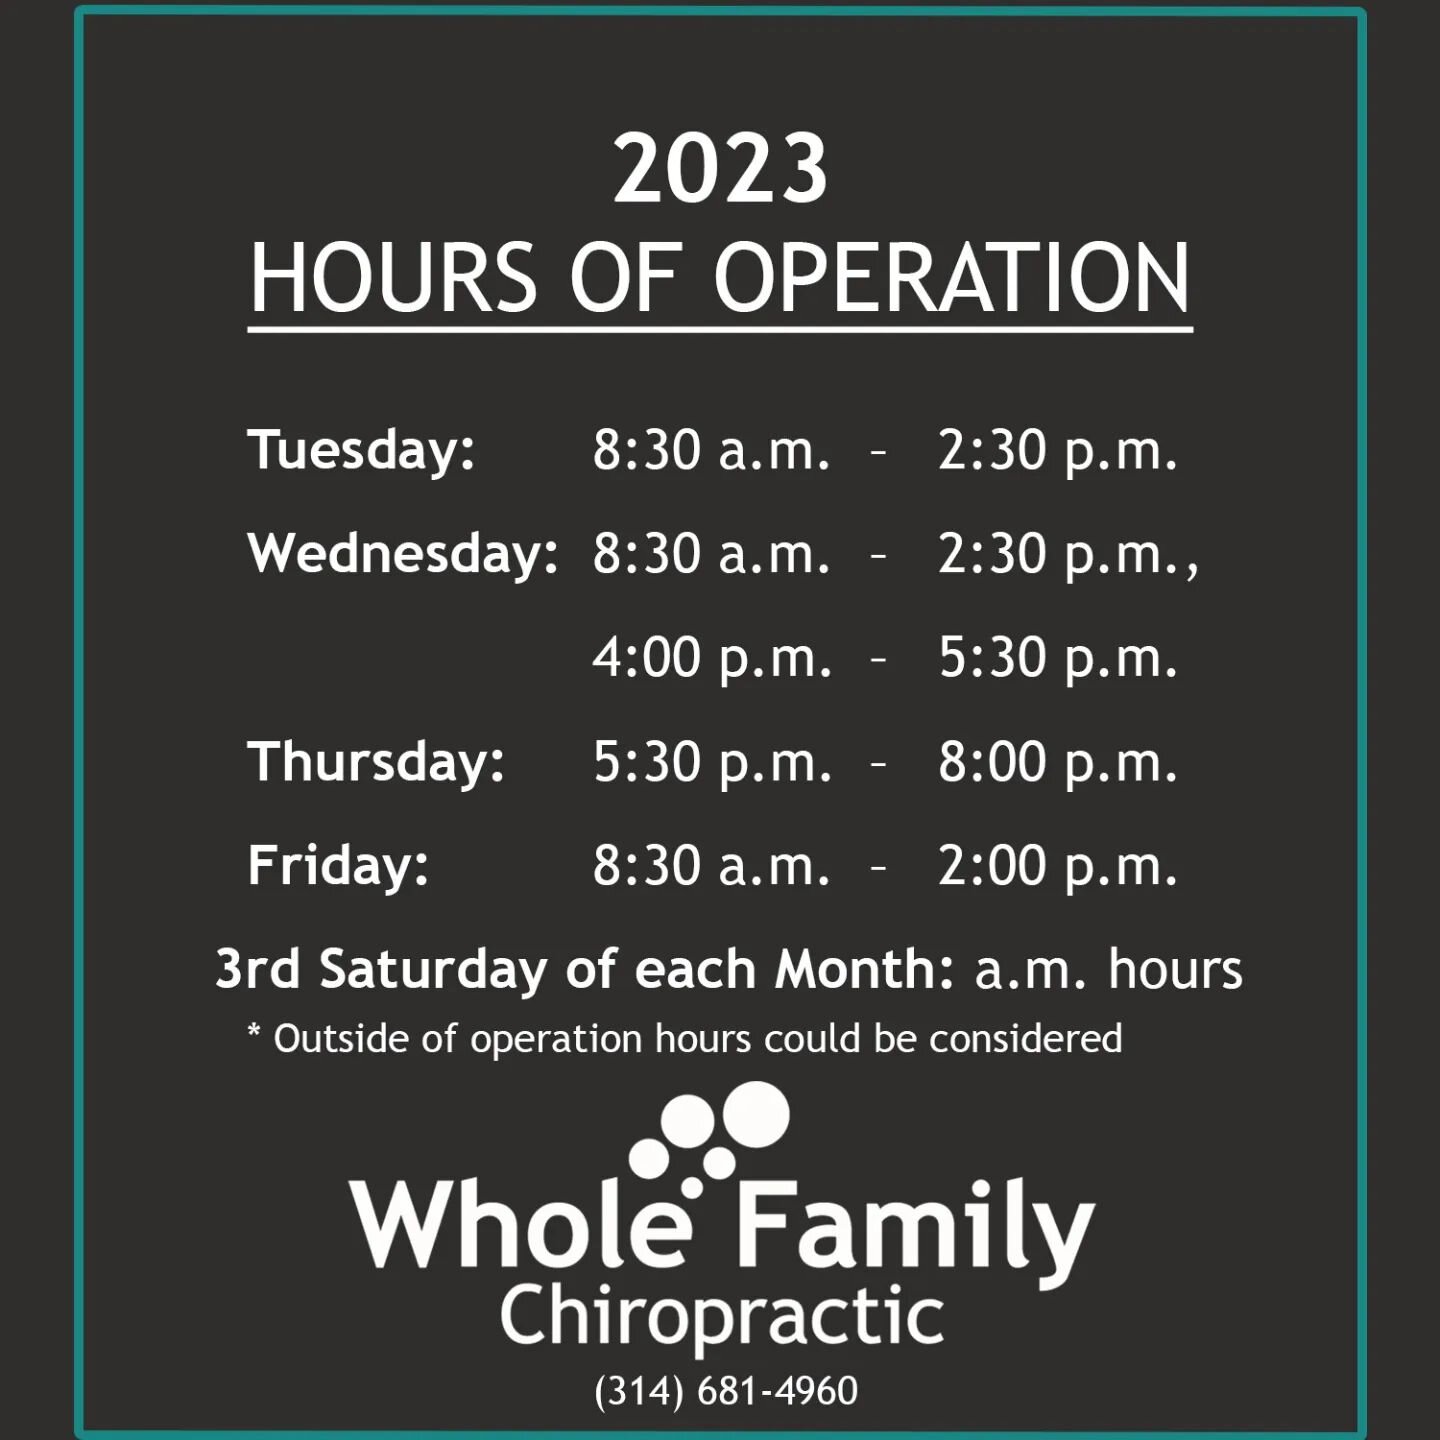 2023 Hours of Operation 
Schedule your appointment today. 
(314) 681-4960

#chiropractic #chiro #chiropracticadjustment #chiropractor #hoursofoperation #wellness #health